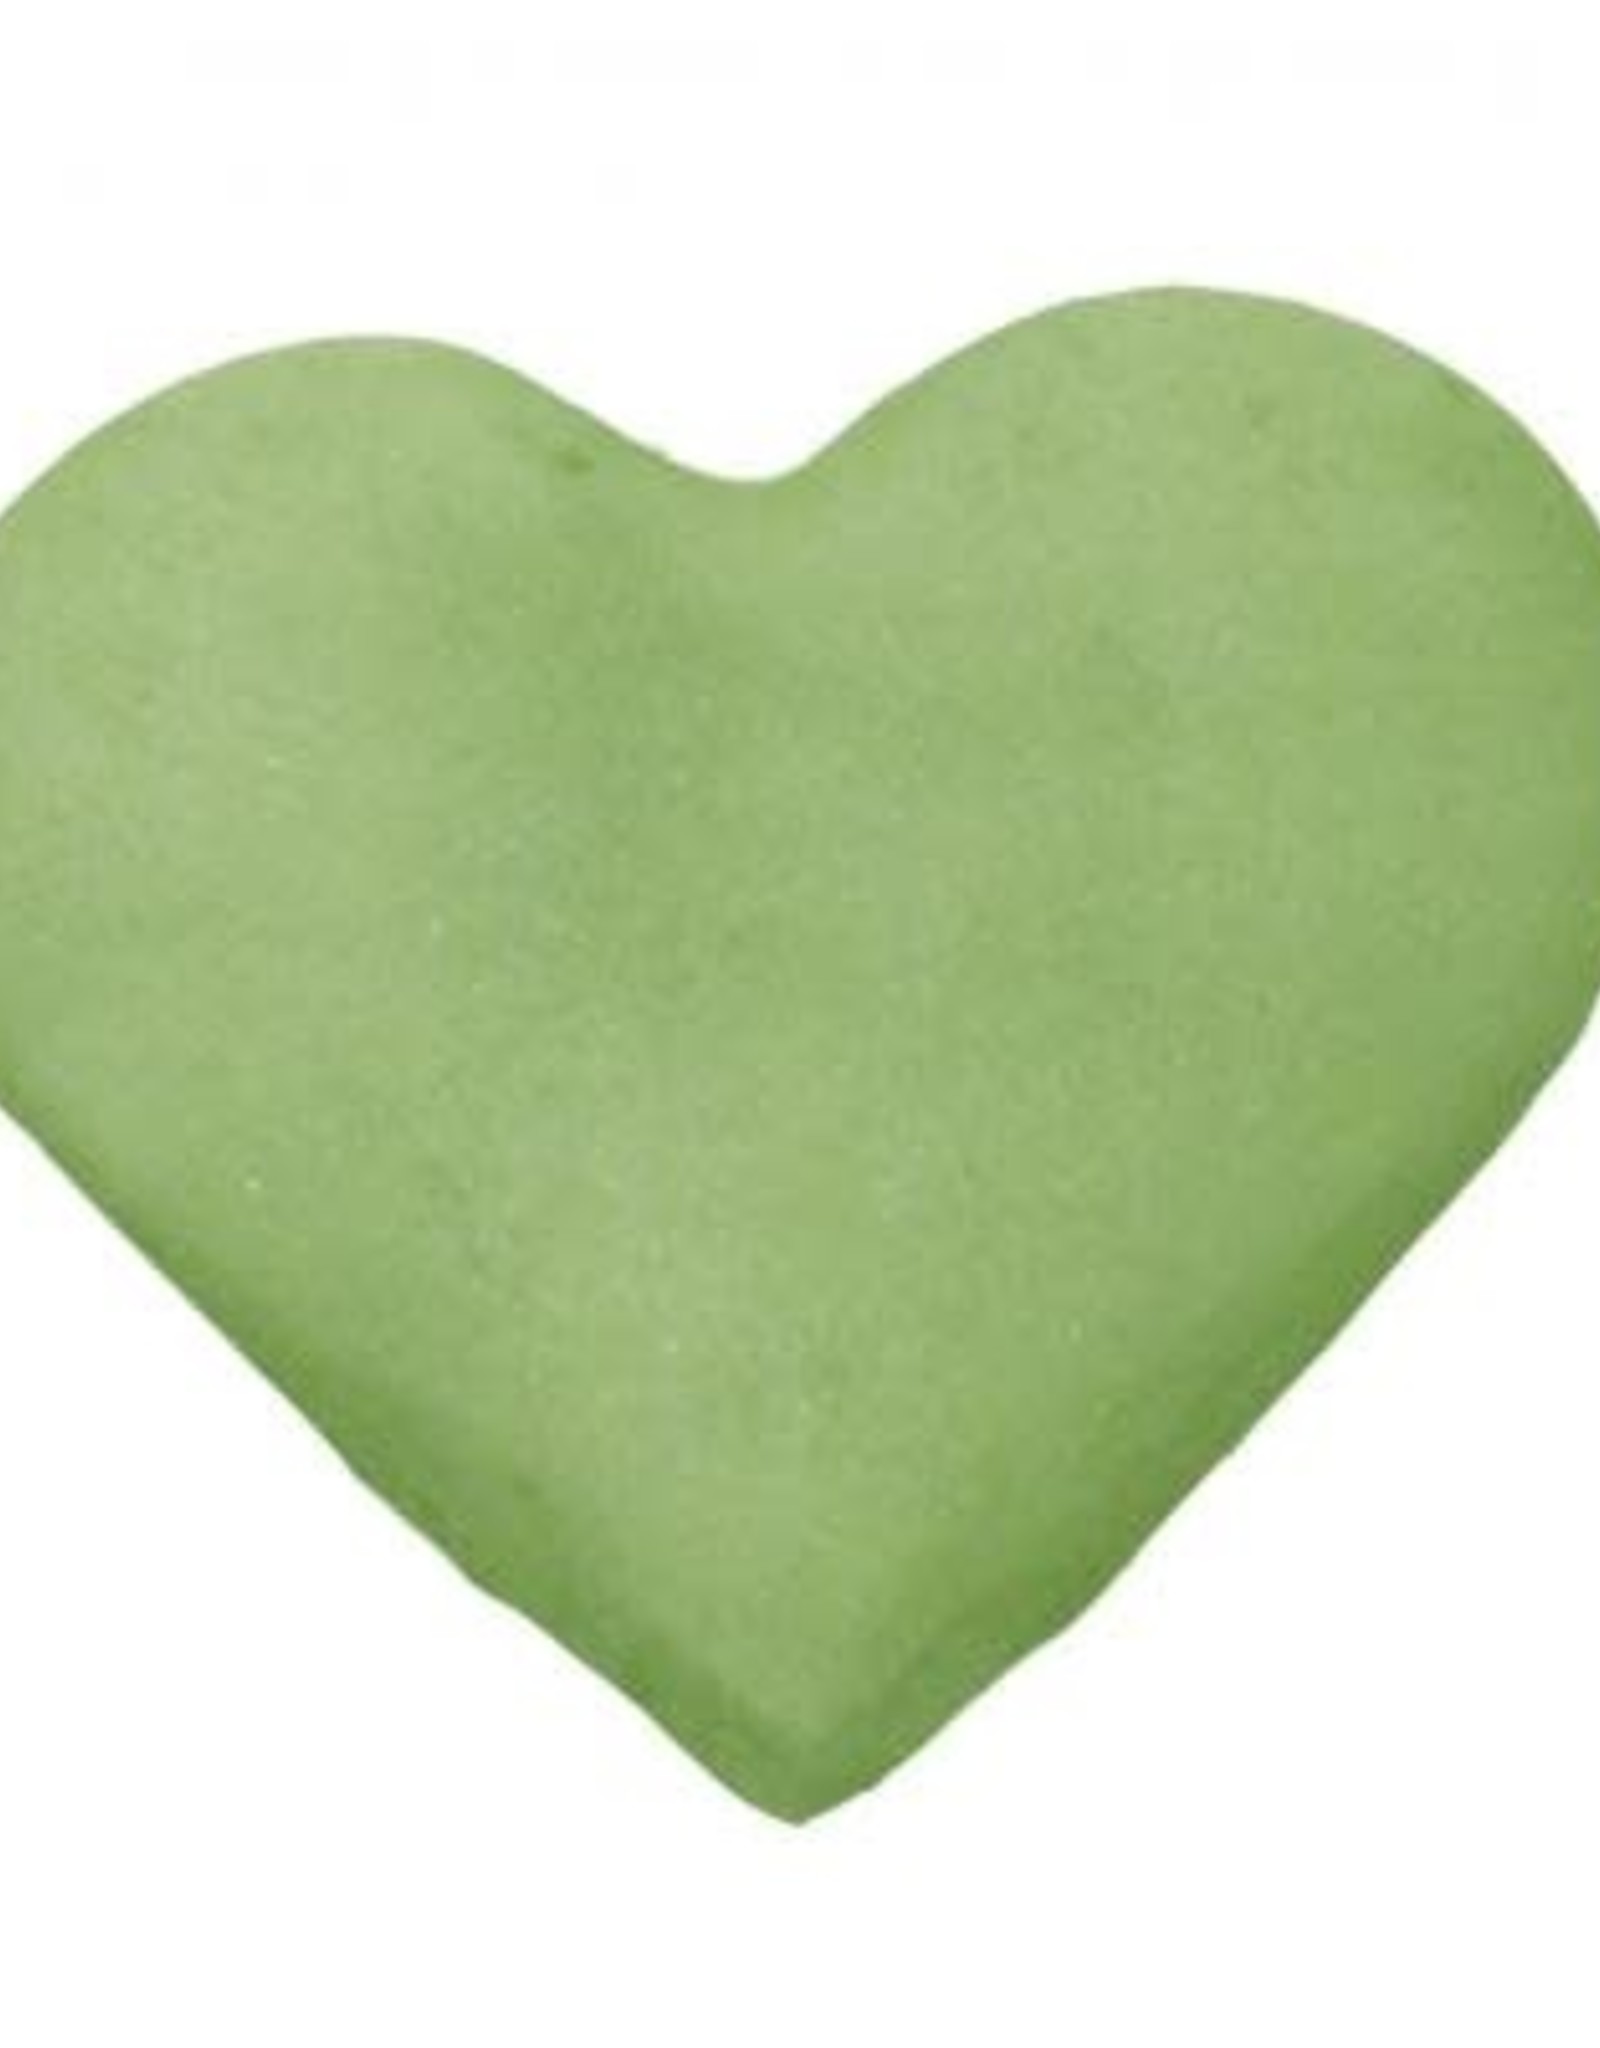 CK Products Designer Luster Dust (Meadow Green)